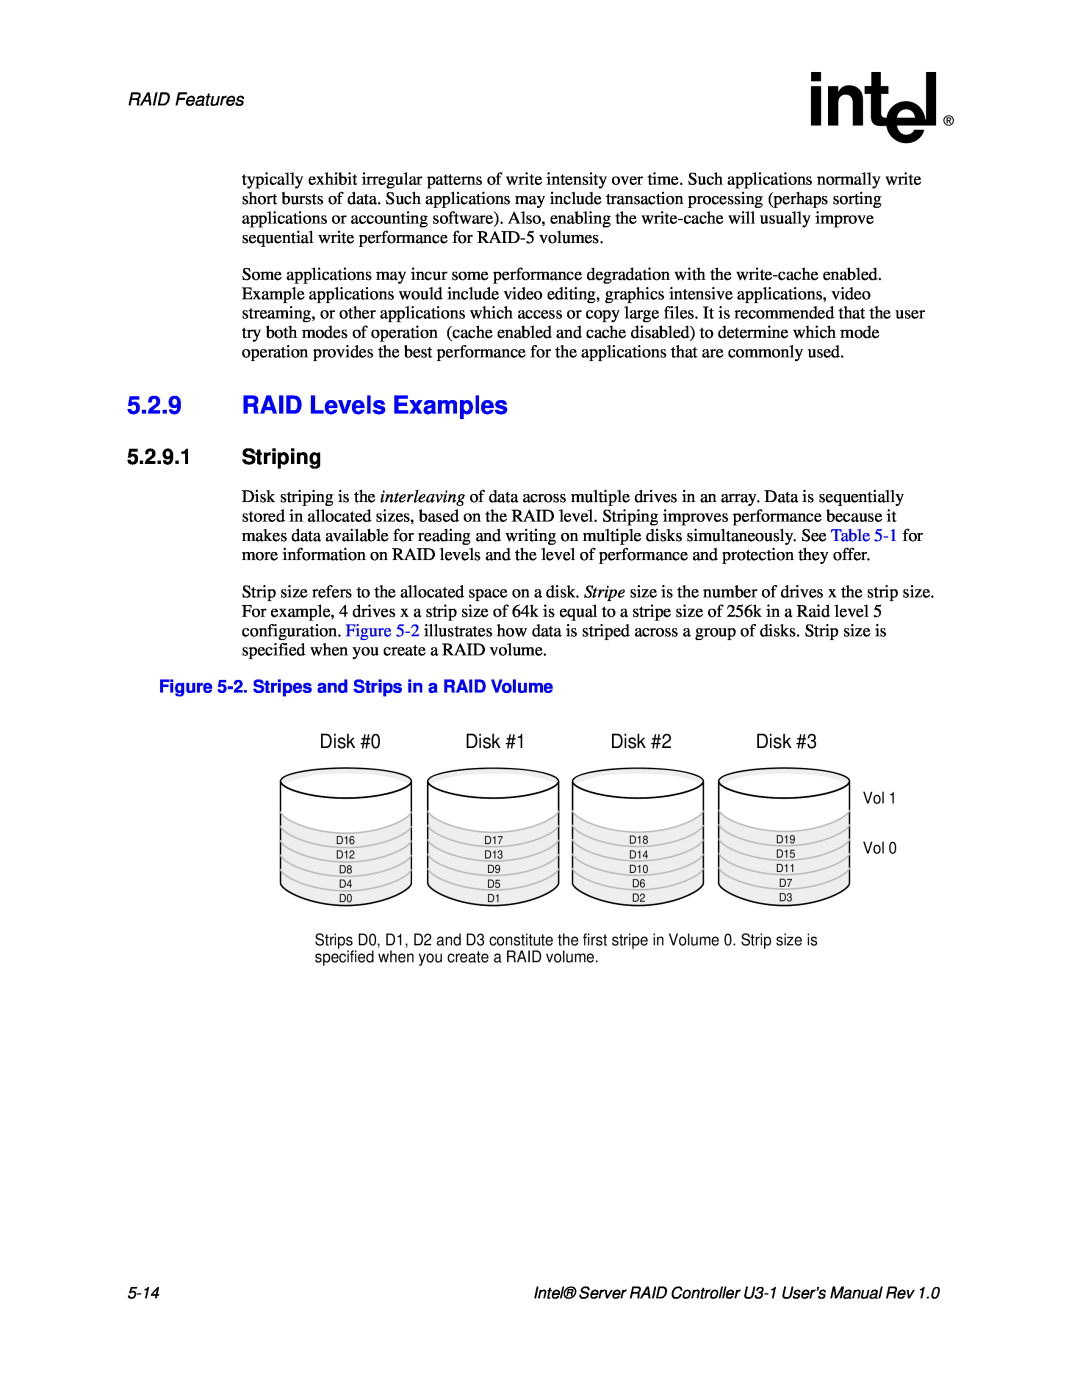 Intel SRCU31 user manual 5.2.9.1Striping, Disk #0, Disk #1, Disk #2, RAID Features, 2.Stripes and Strips in a RAID Volume 